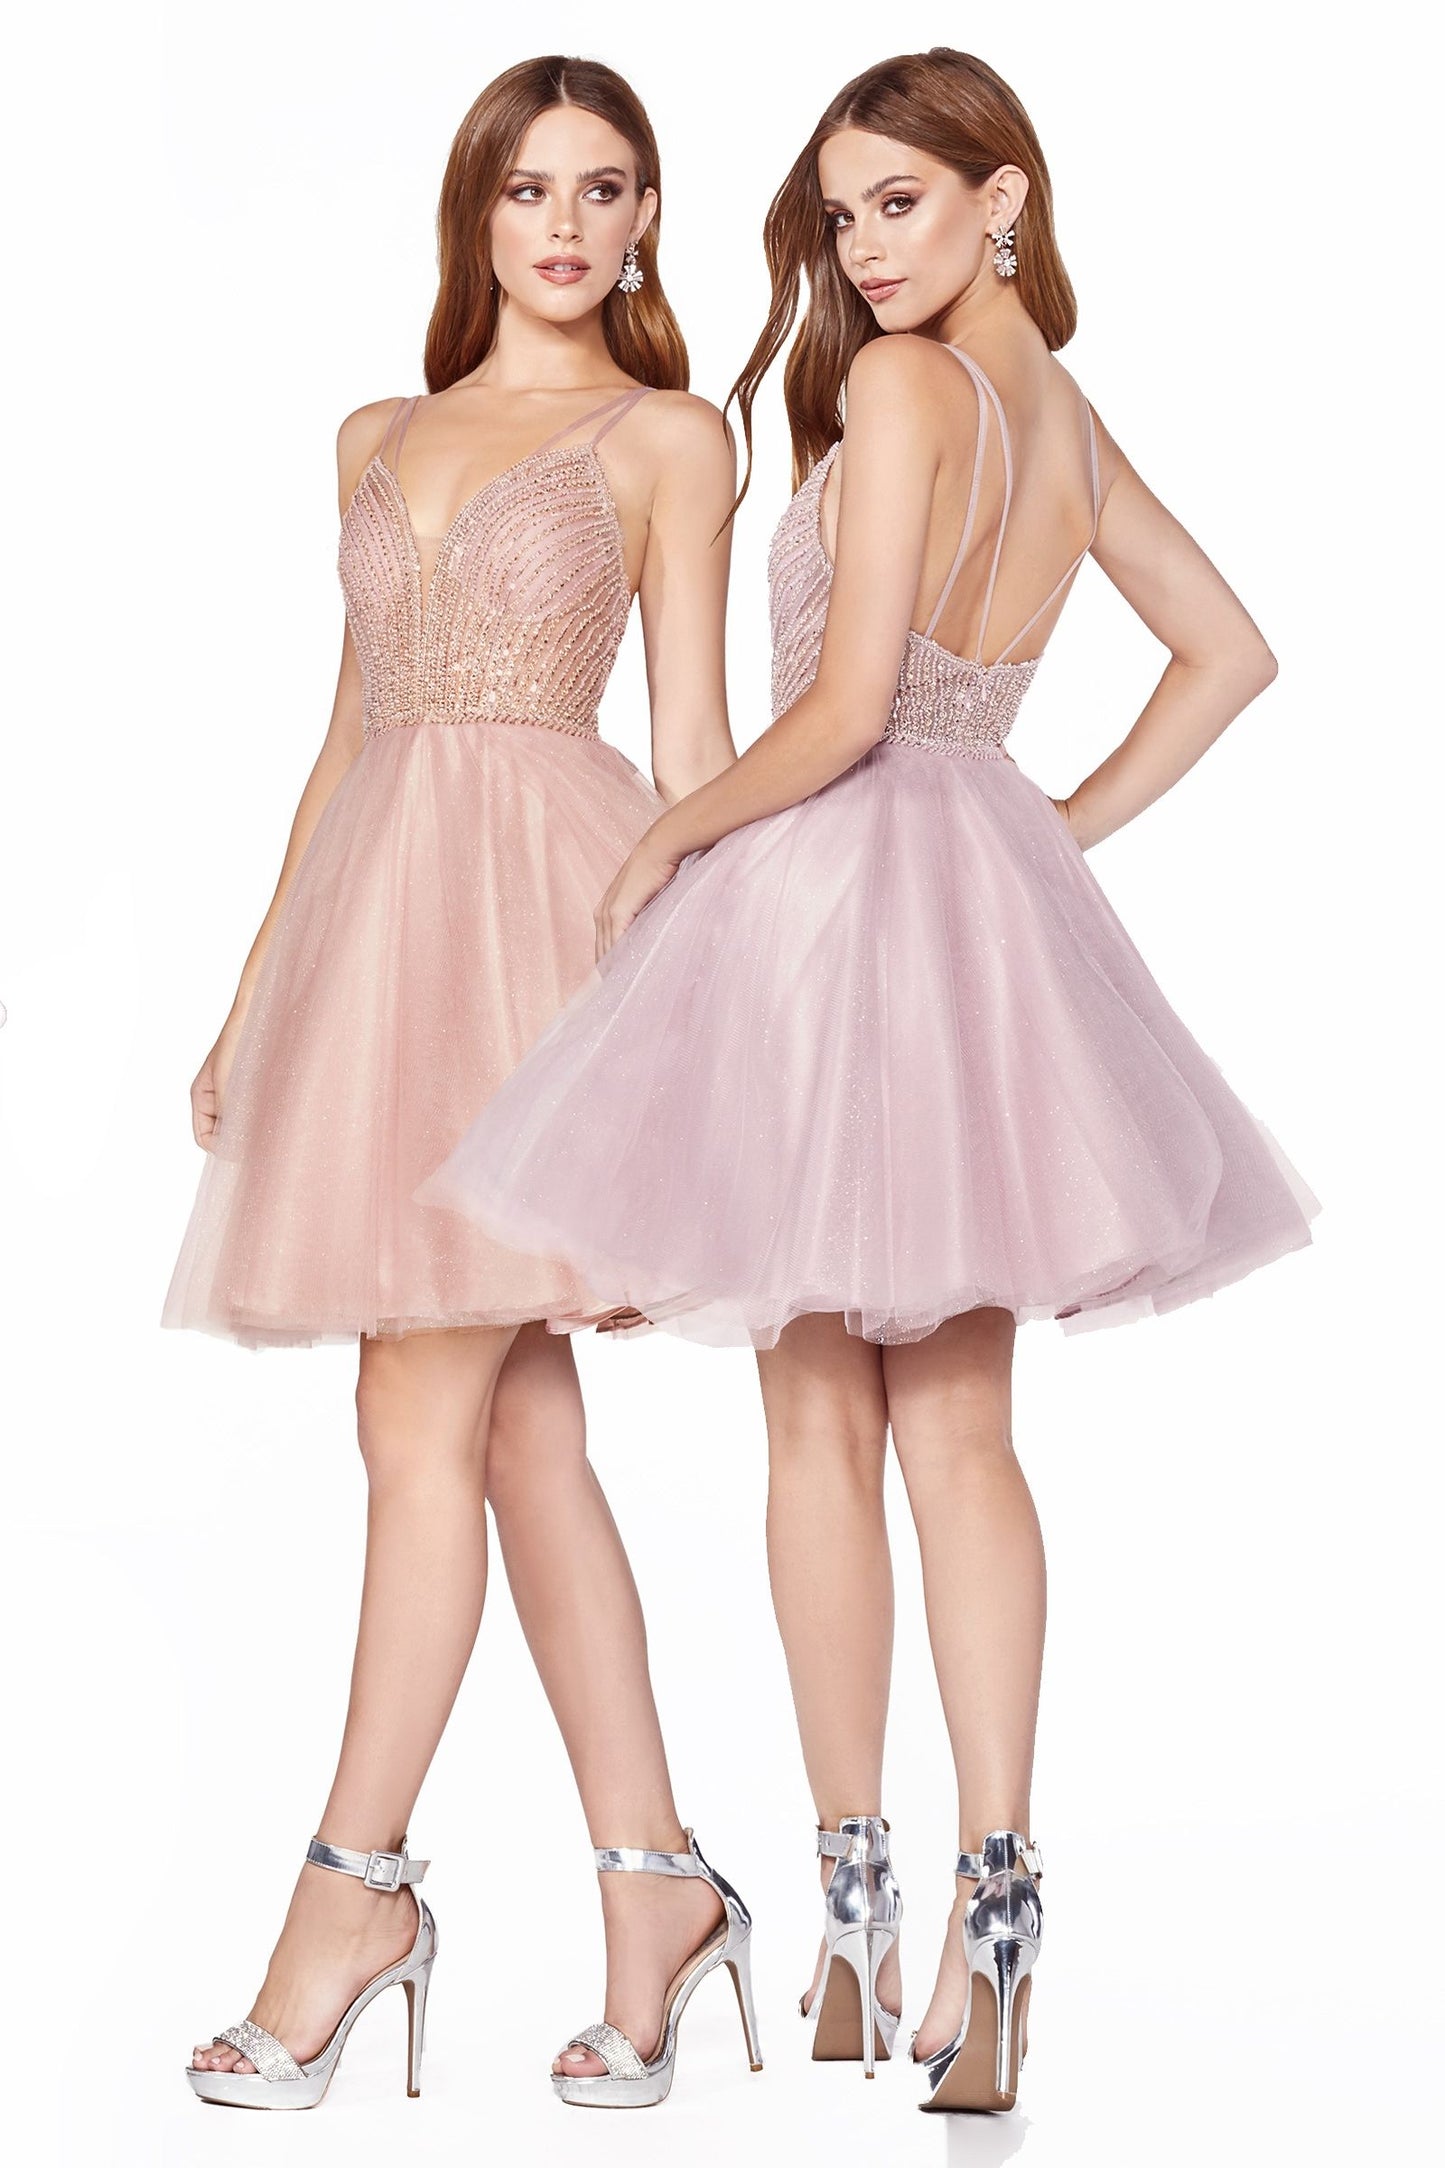 A-Line Short Dress With Embellished Bodice And Layered Tulle Glitter Skirt.